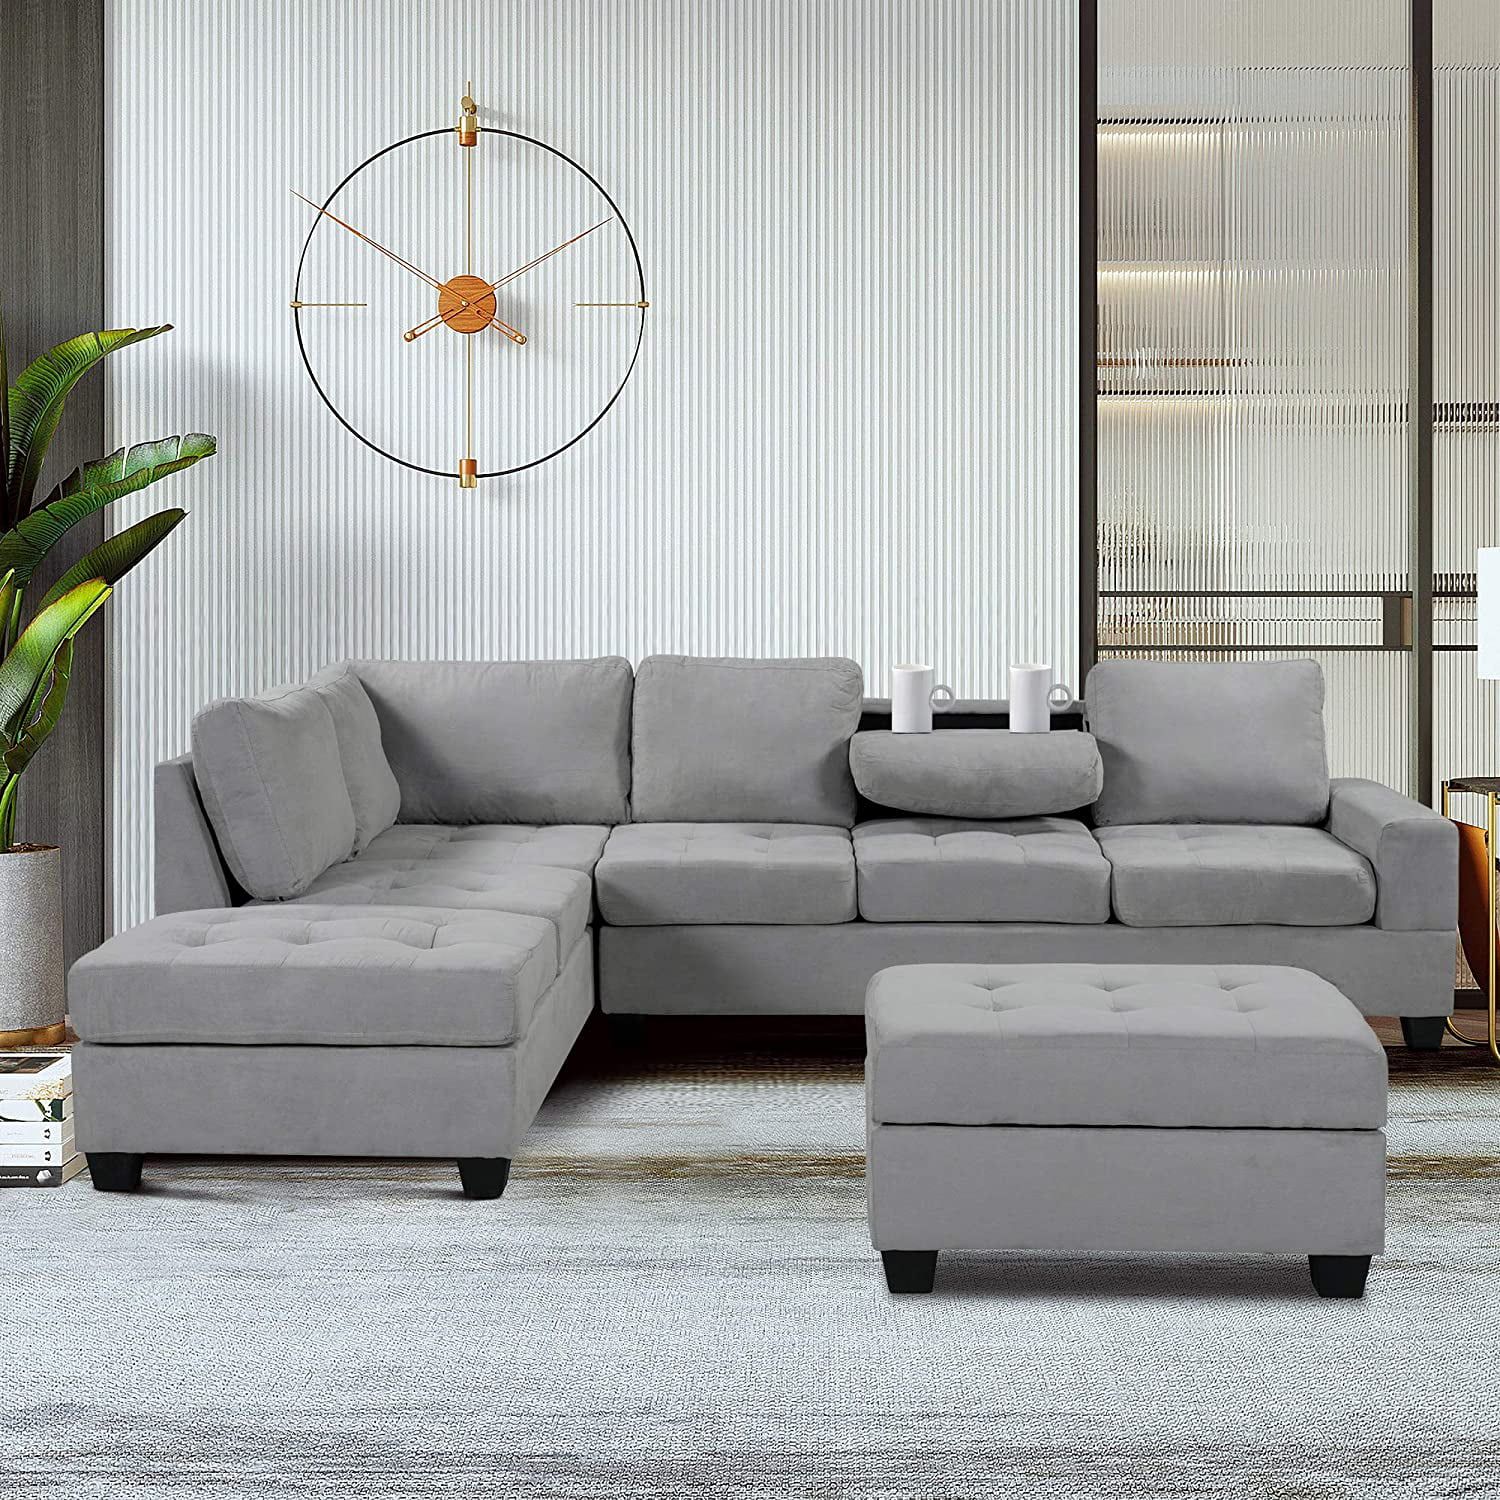 3 Piece Convertible Sectional Sofa L Shaped Couch With Reversible With Convertible L Shaped Sectional Sofas (View 3 of 20)